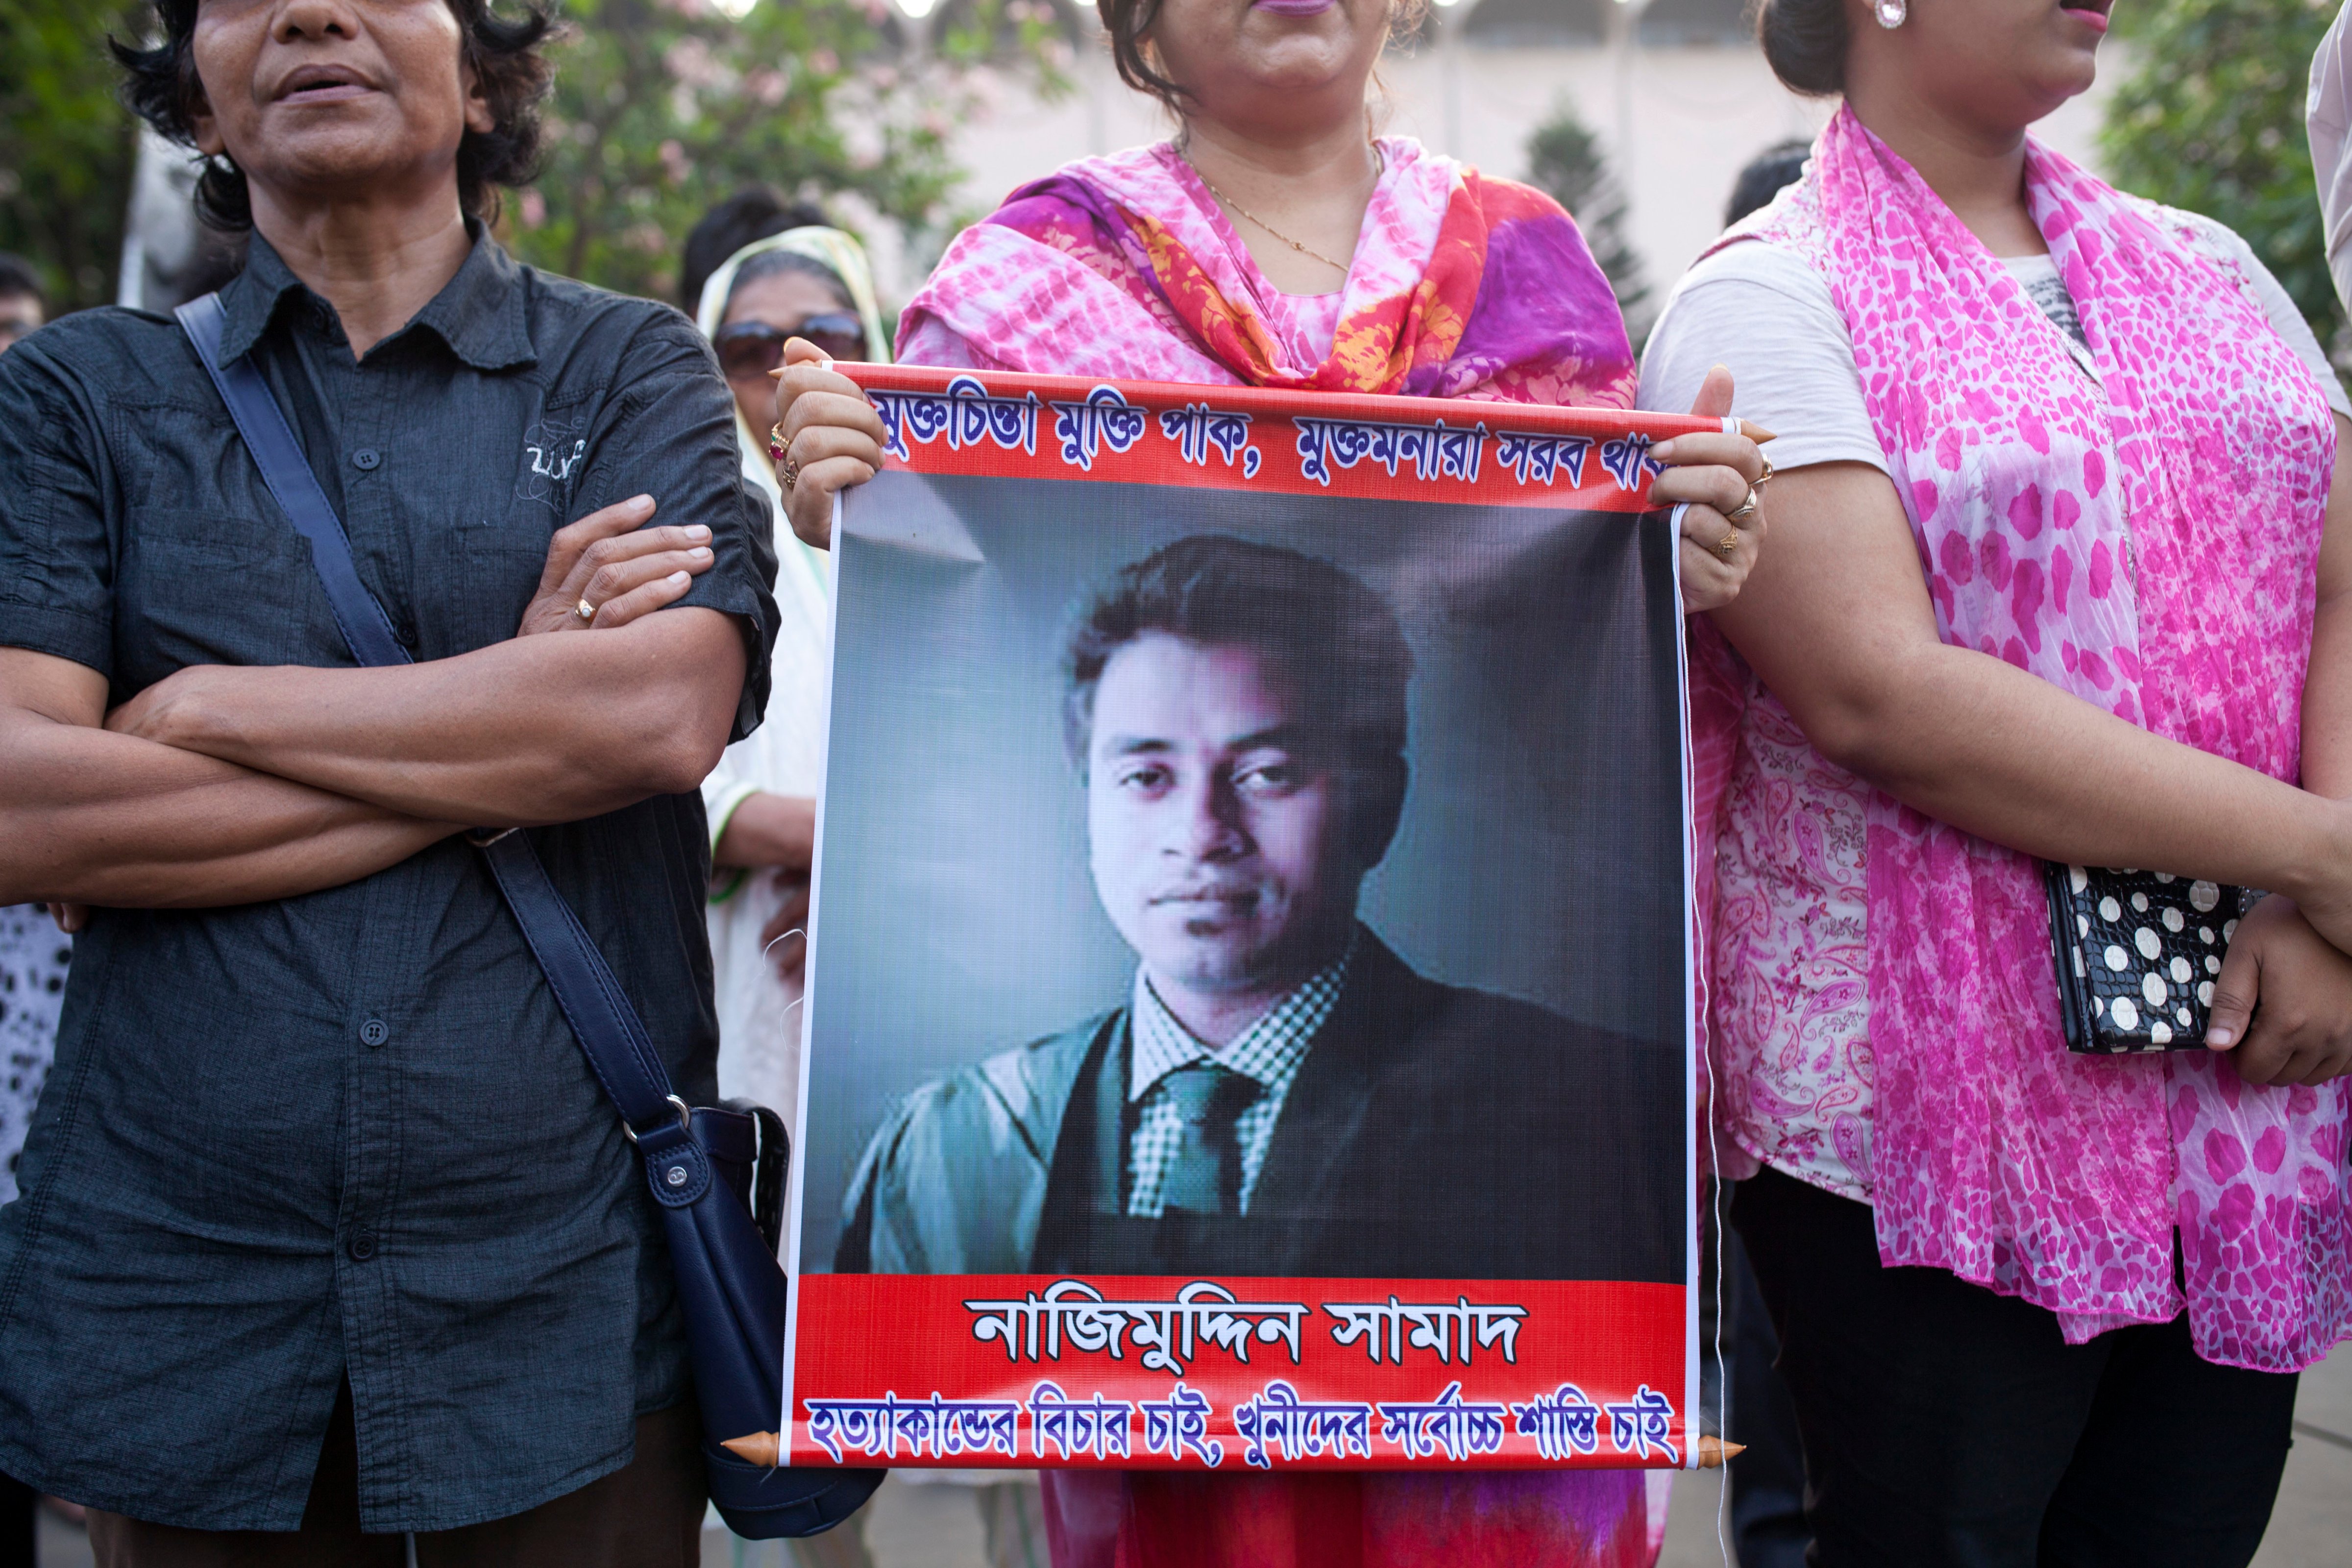 Activists protest at a rally over the murder of activist Nazimuddin Samad on April 7, 2016, in Dhaka, Bangladesh (Zakir Hossain Chowdhury—Barcroft Media/Getty Images)